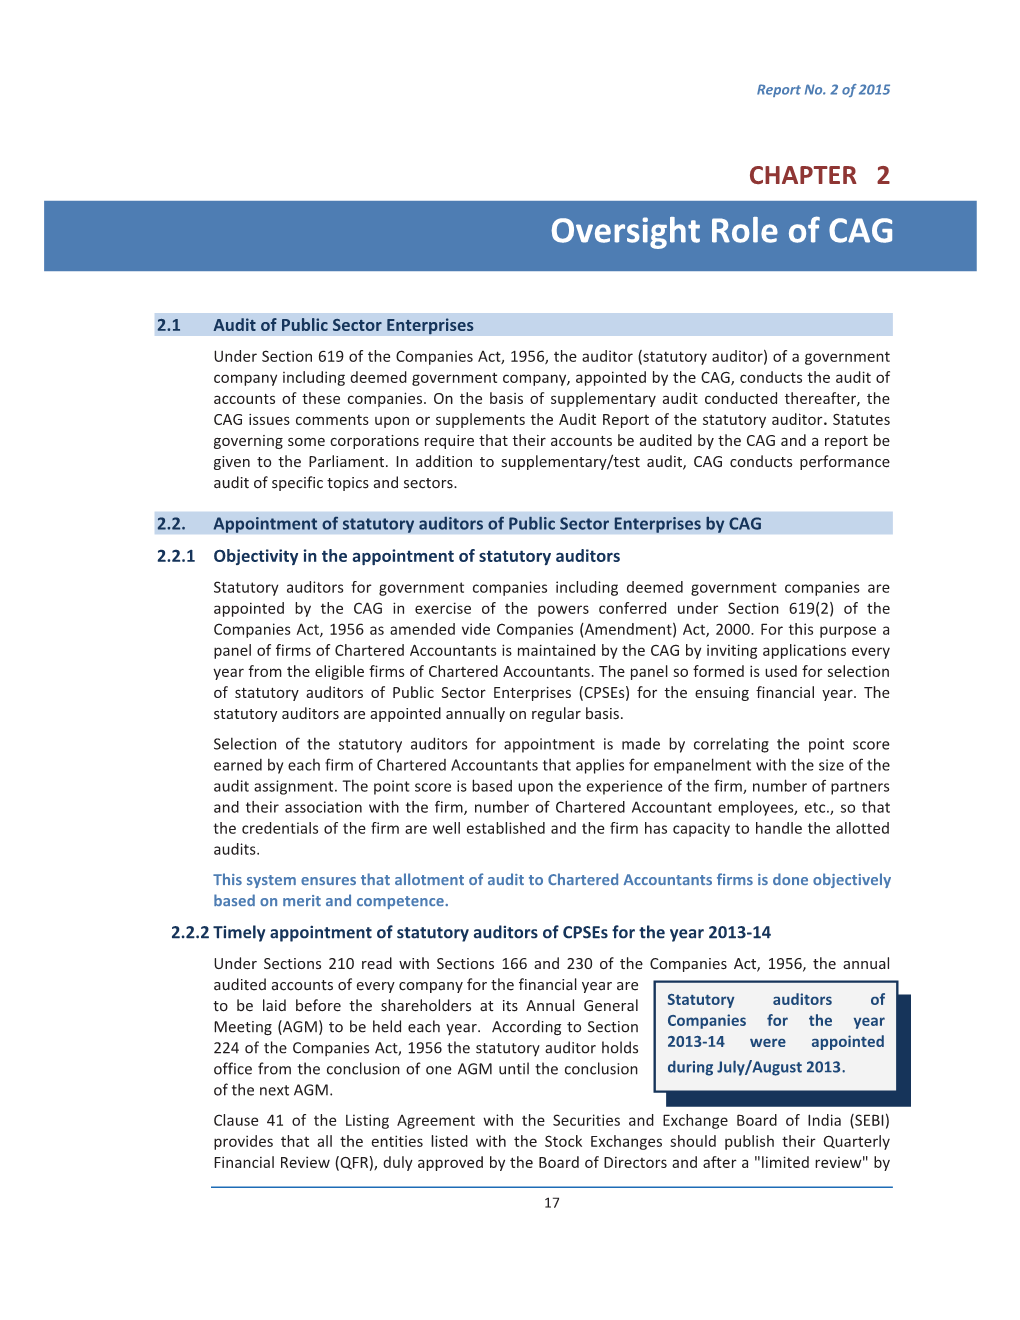 Oversight Role of CAG